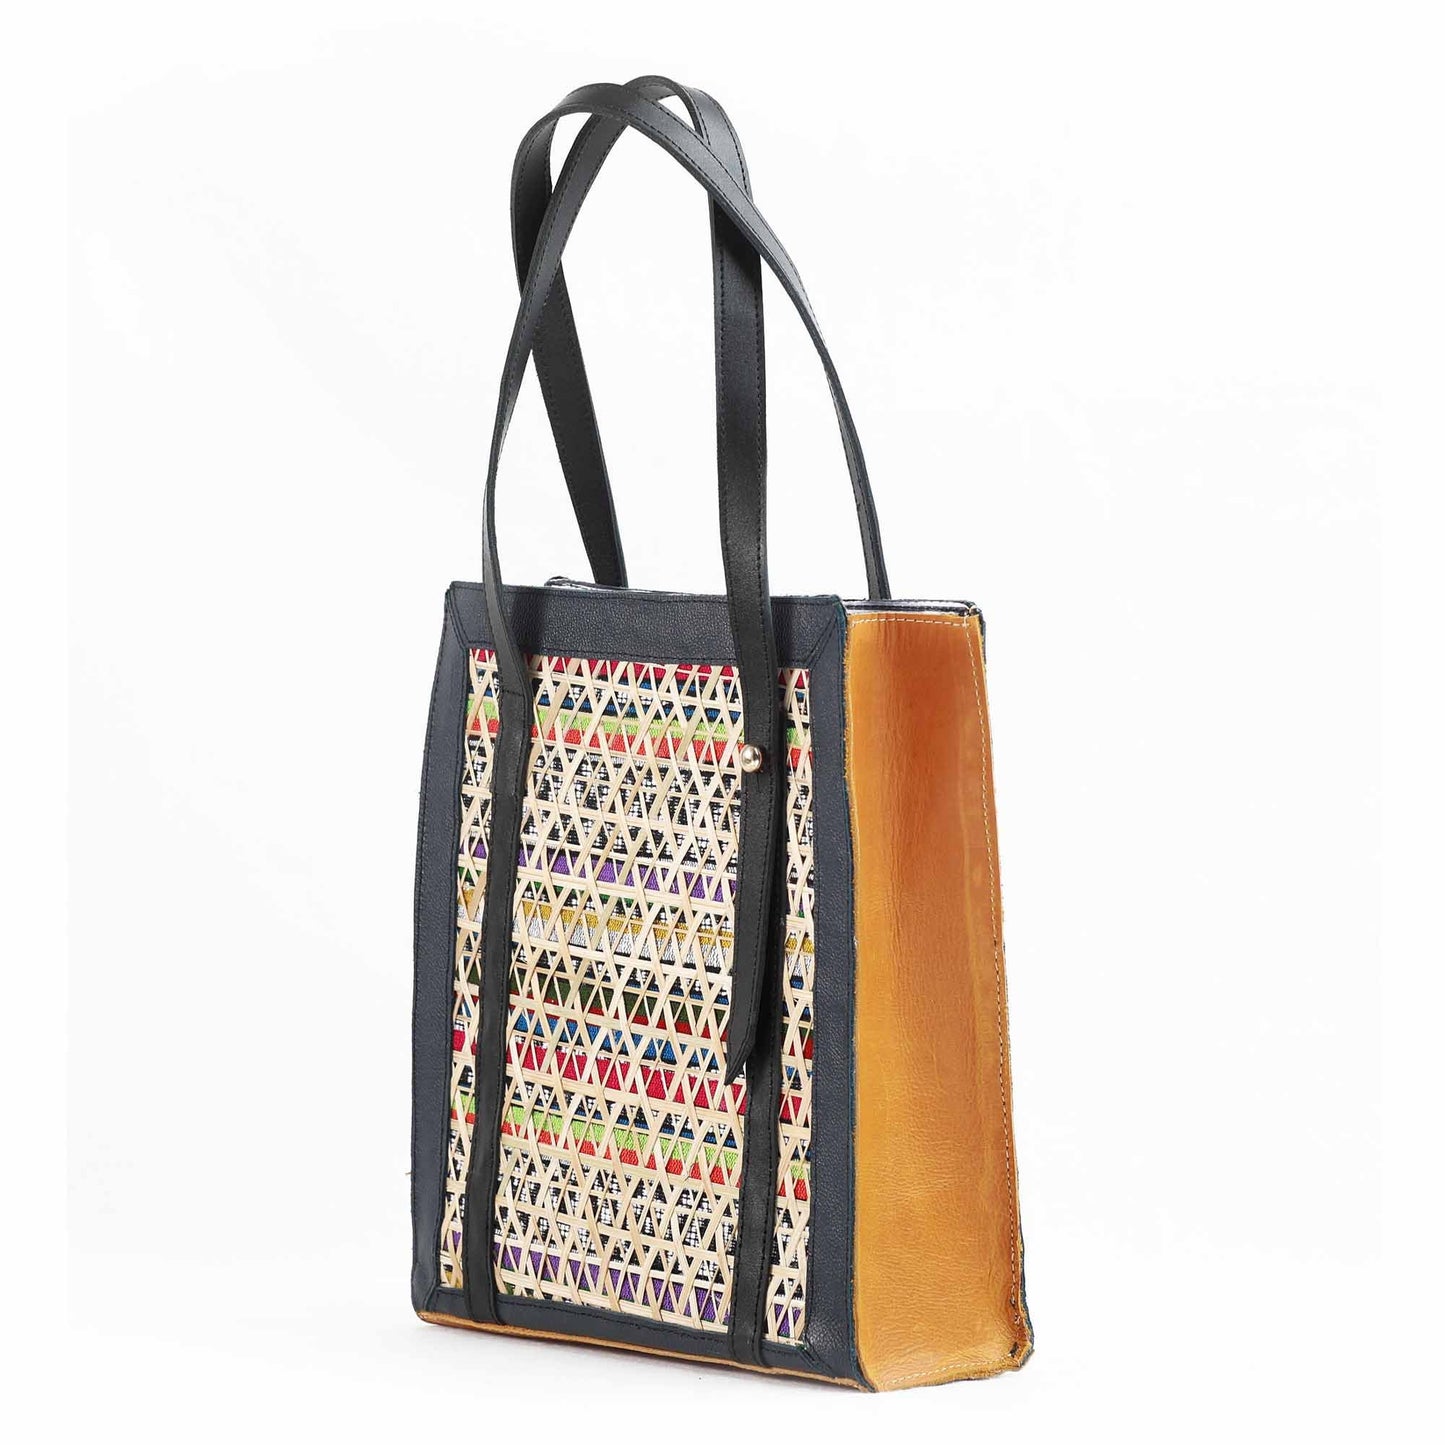 Unique Handmade Ethiopian Leather and Bamboo Tote Bag with Colorful Handwoven Fabric Lining – Sustainable Style for Any Occasion by Tenadam